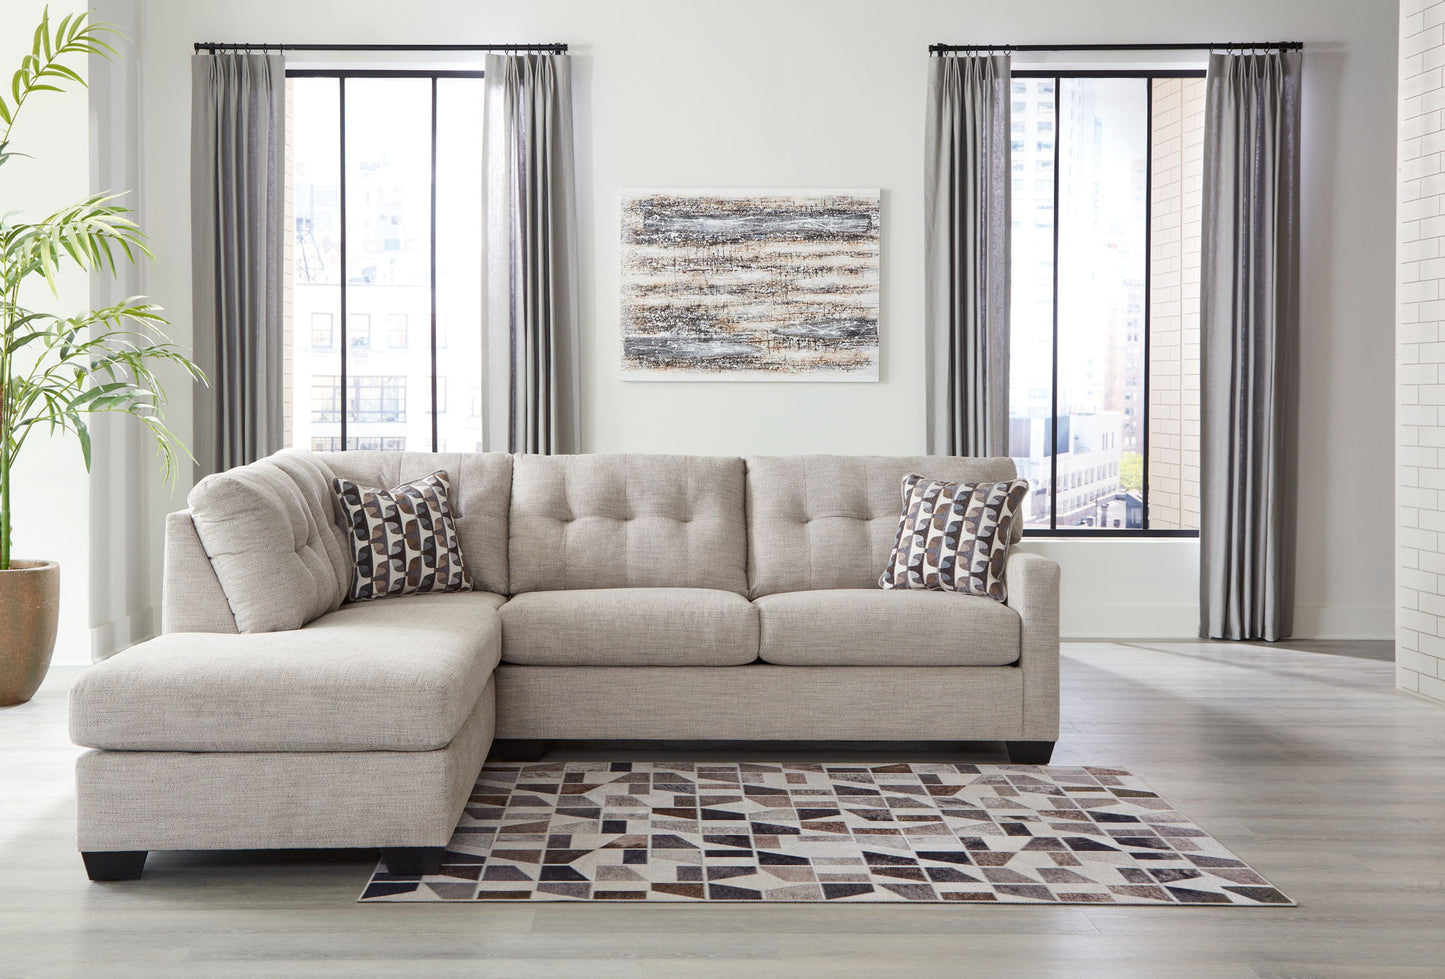 Mahoney - Pebble - 2-Piece Sectional With Laf Corner Chaise